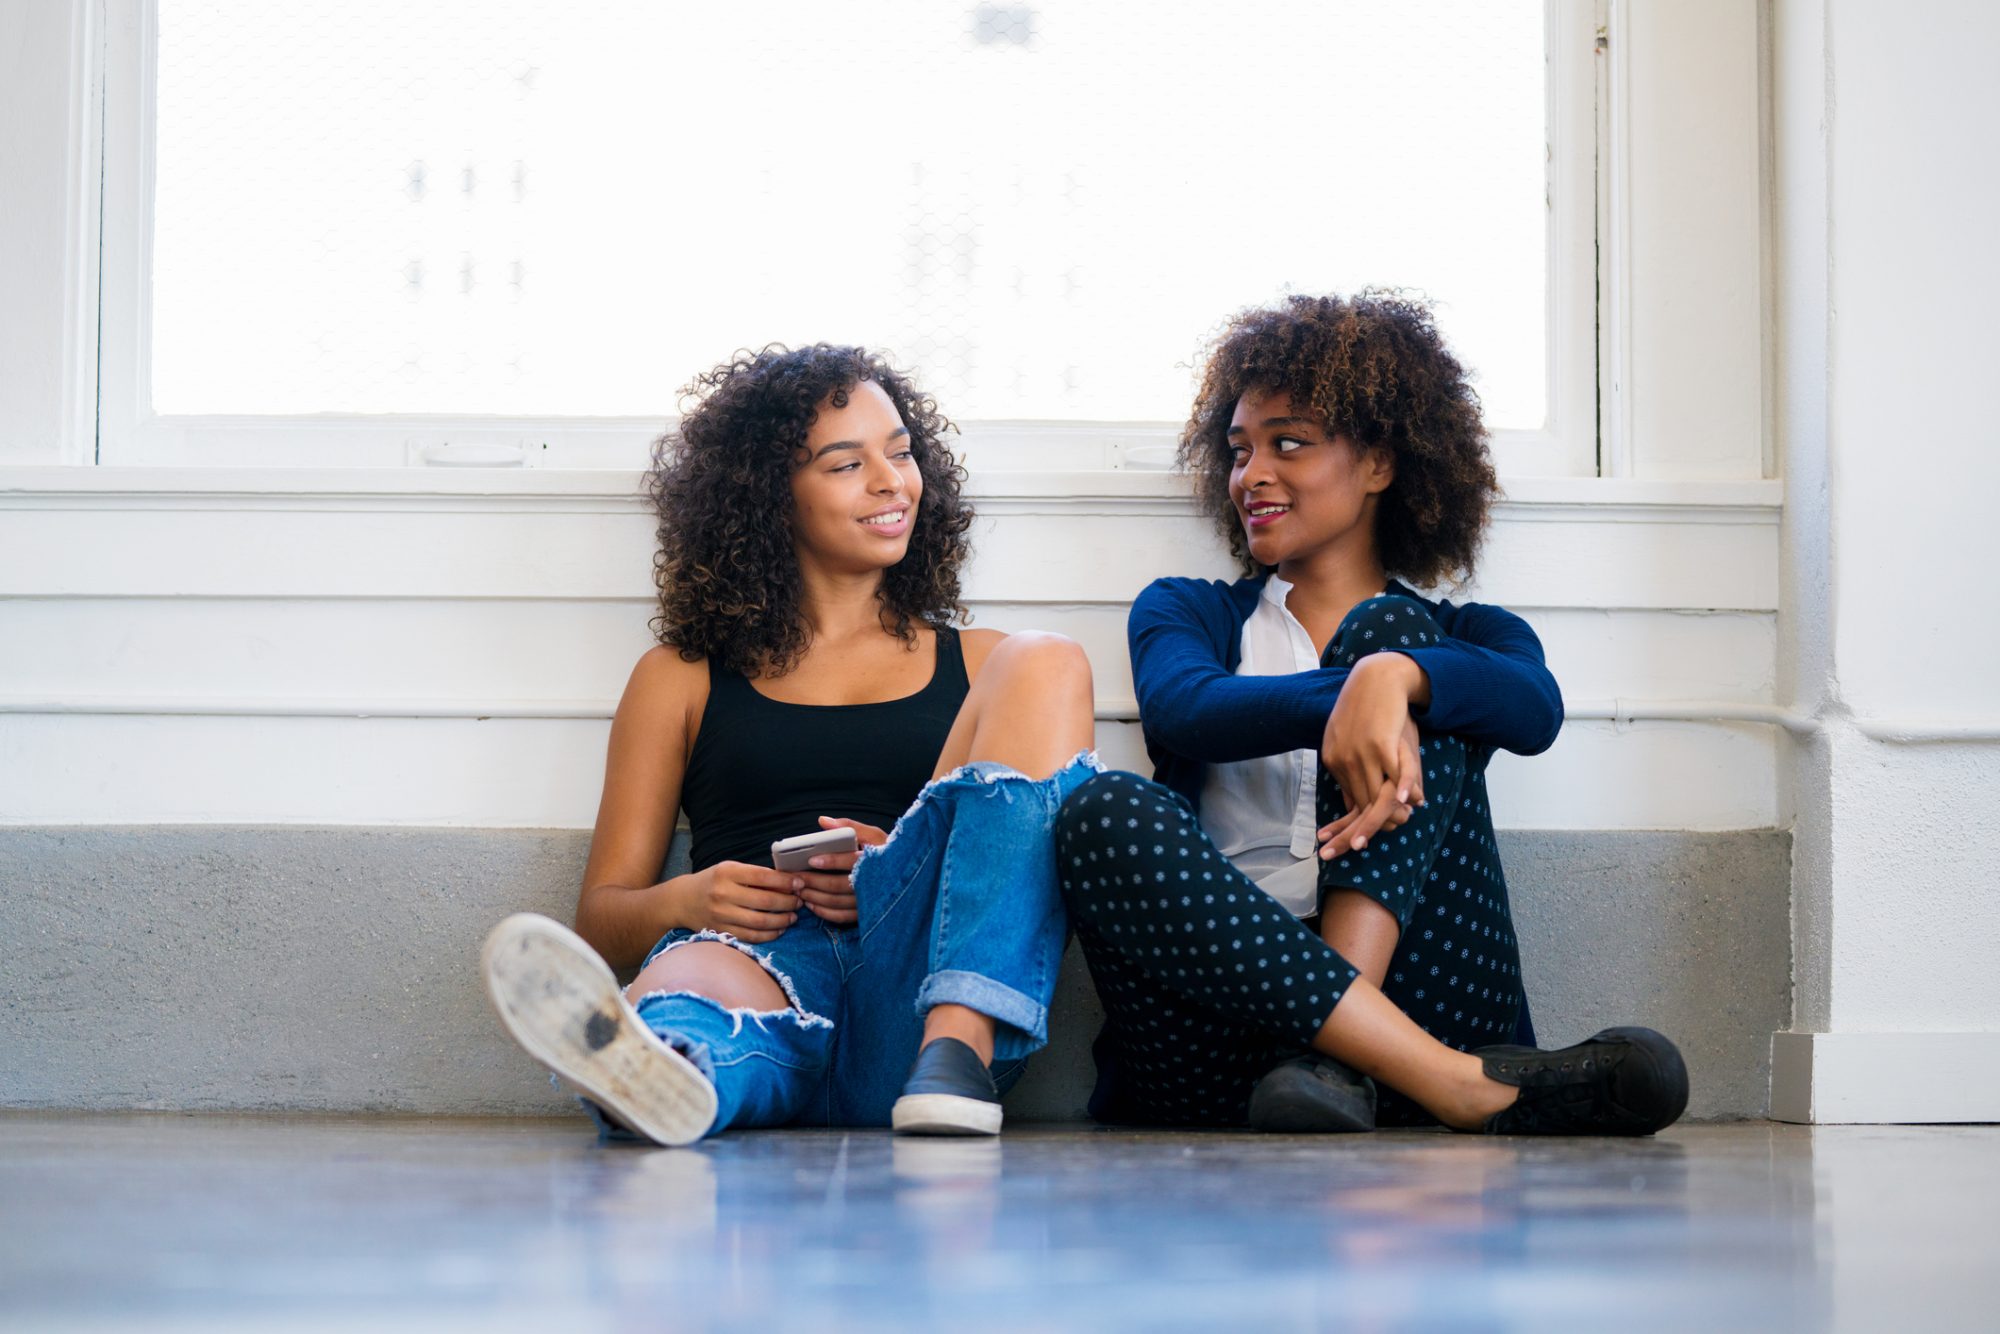 11 Questions to Ask Your Best Friend About DatingHelloGiggles